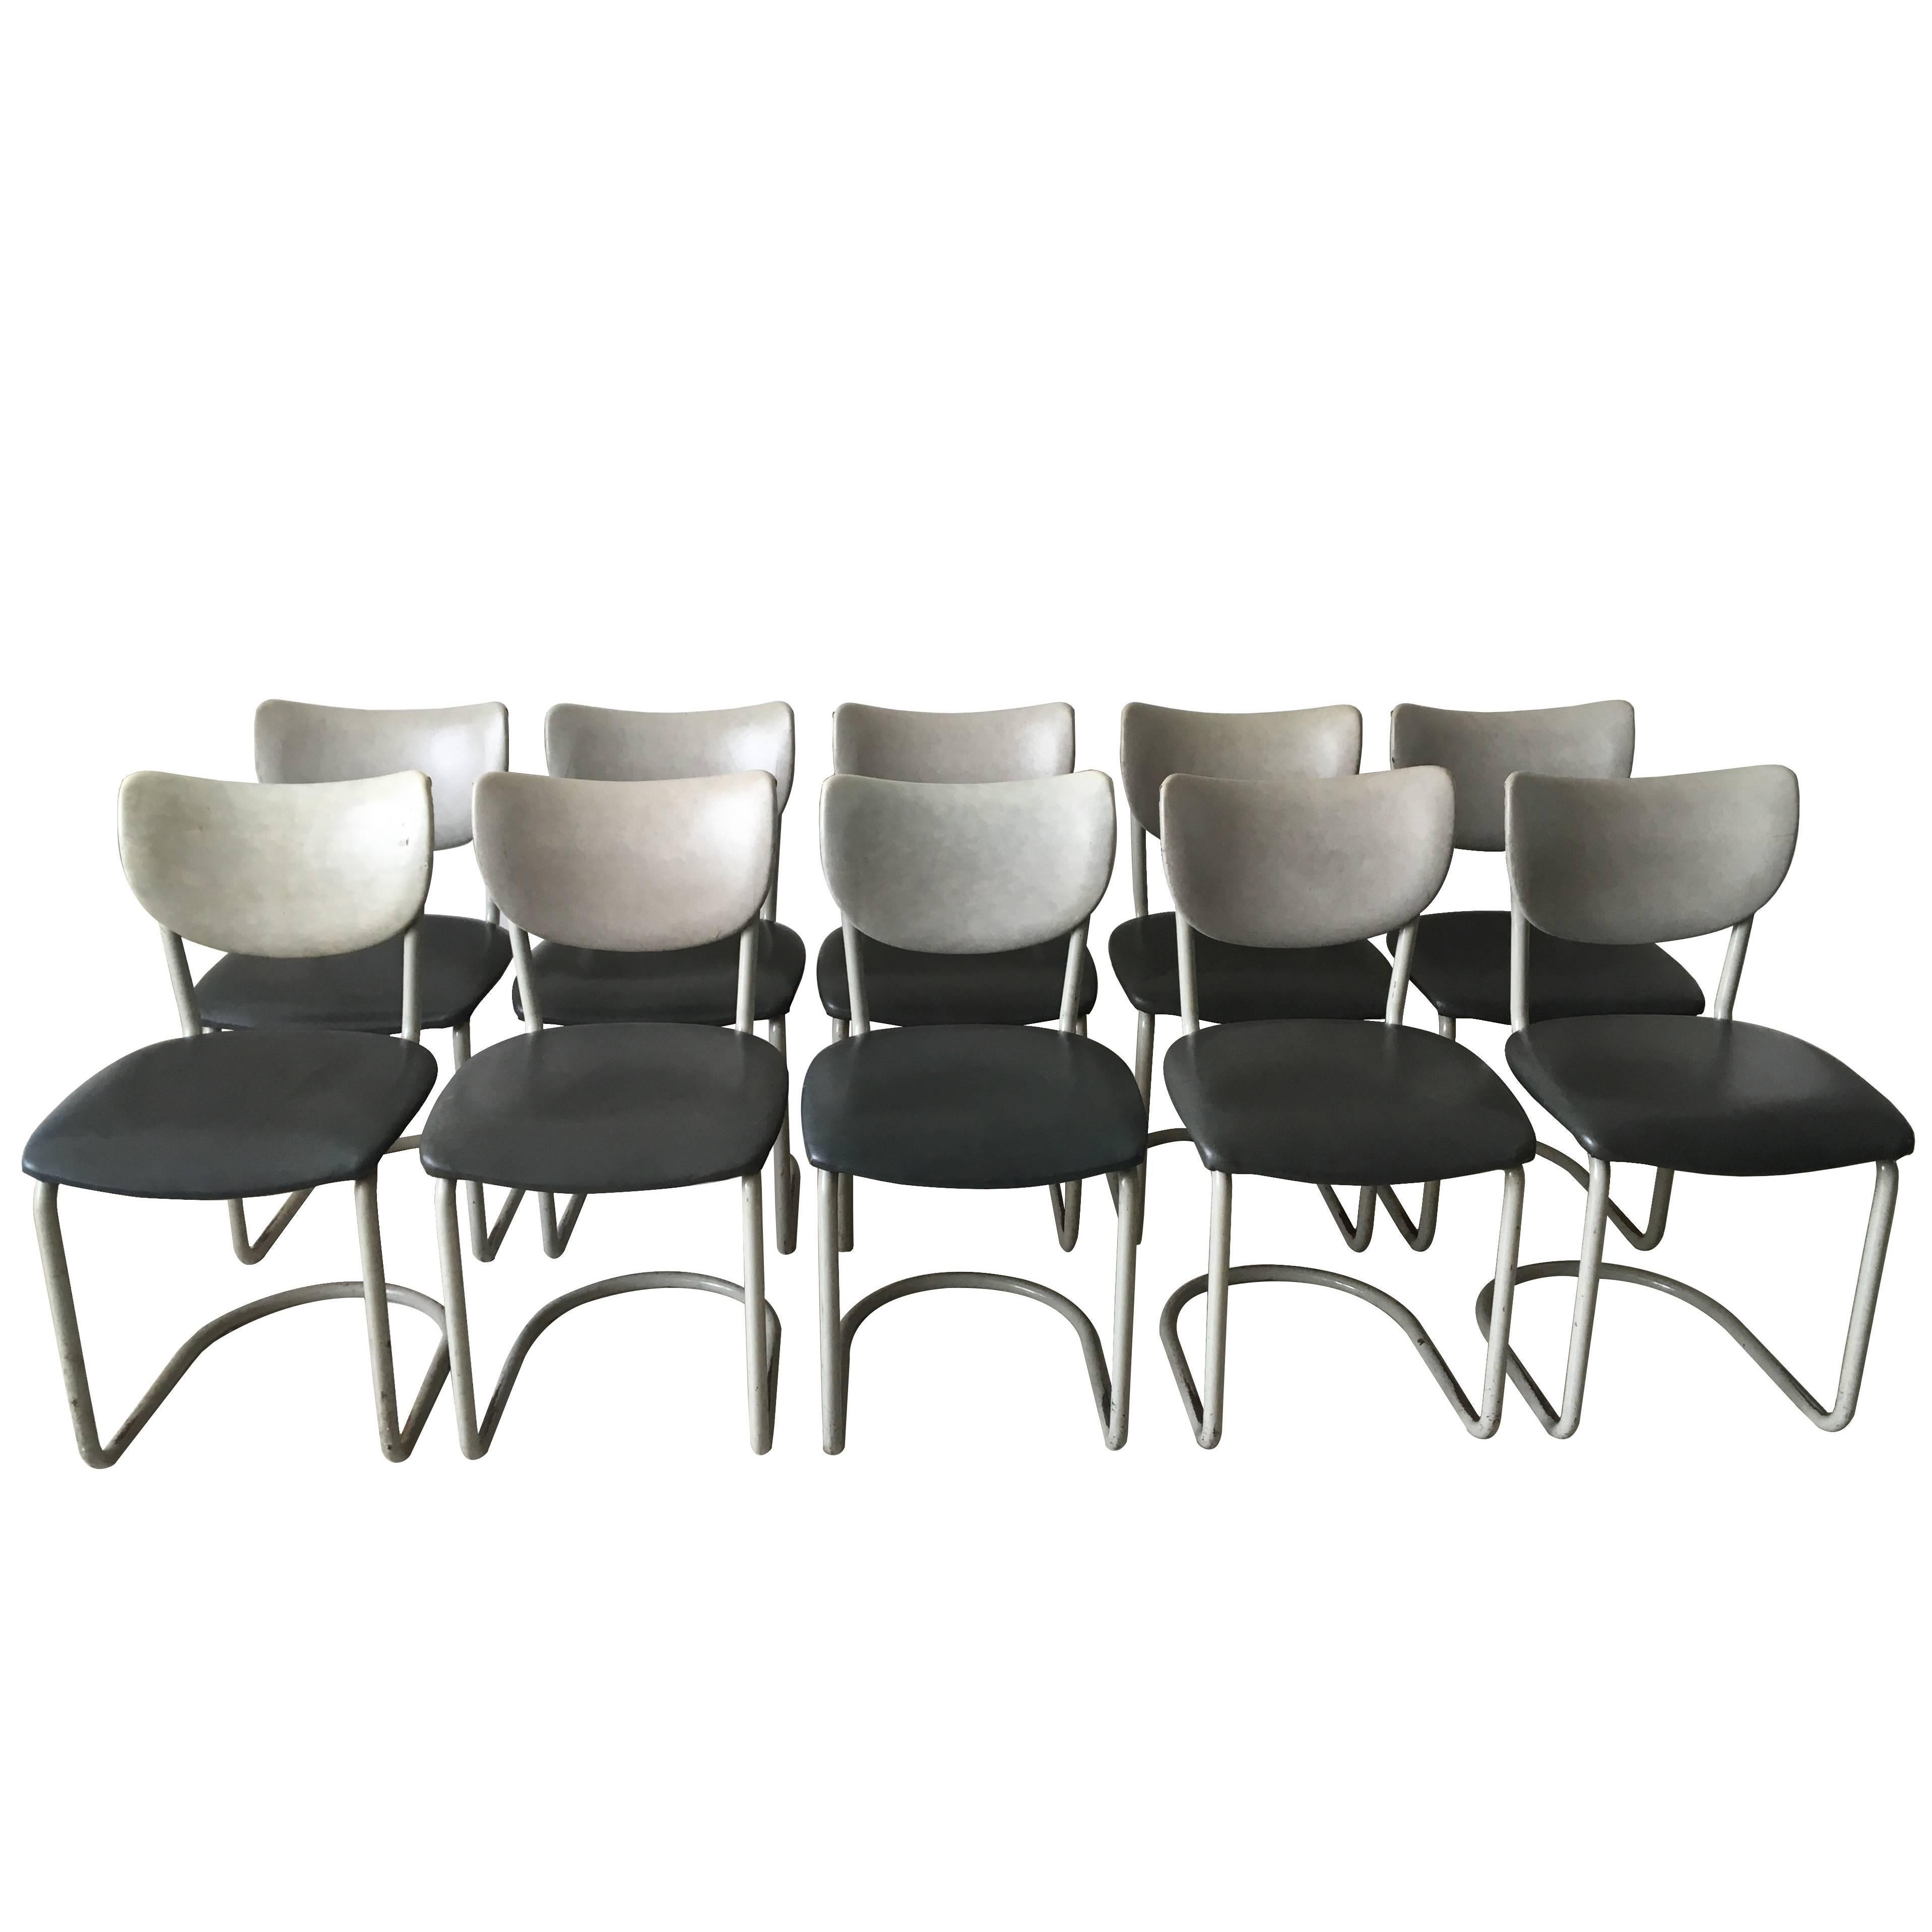 Gebr. De Wit, Industrial, Tubular Dining room chairs, Model 2011, 1950s For Sale